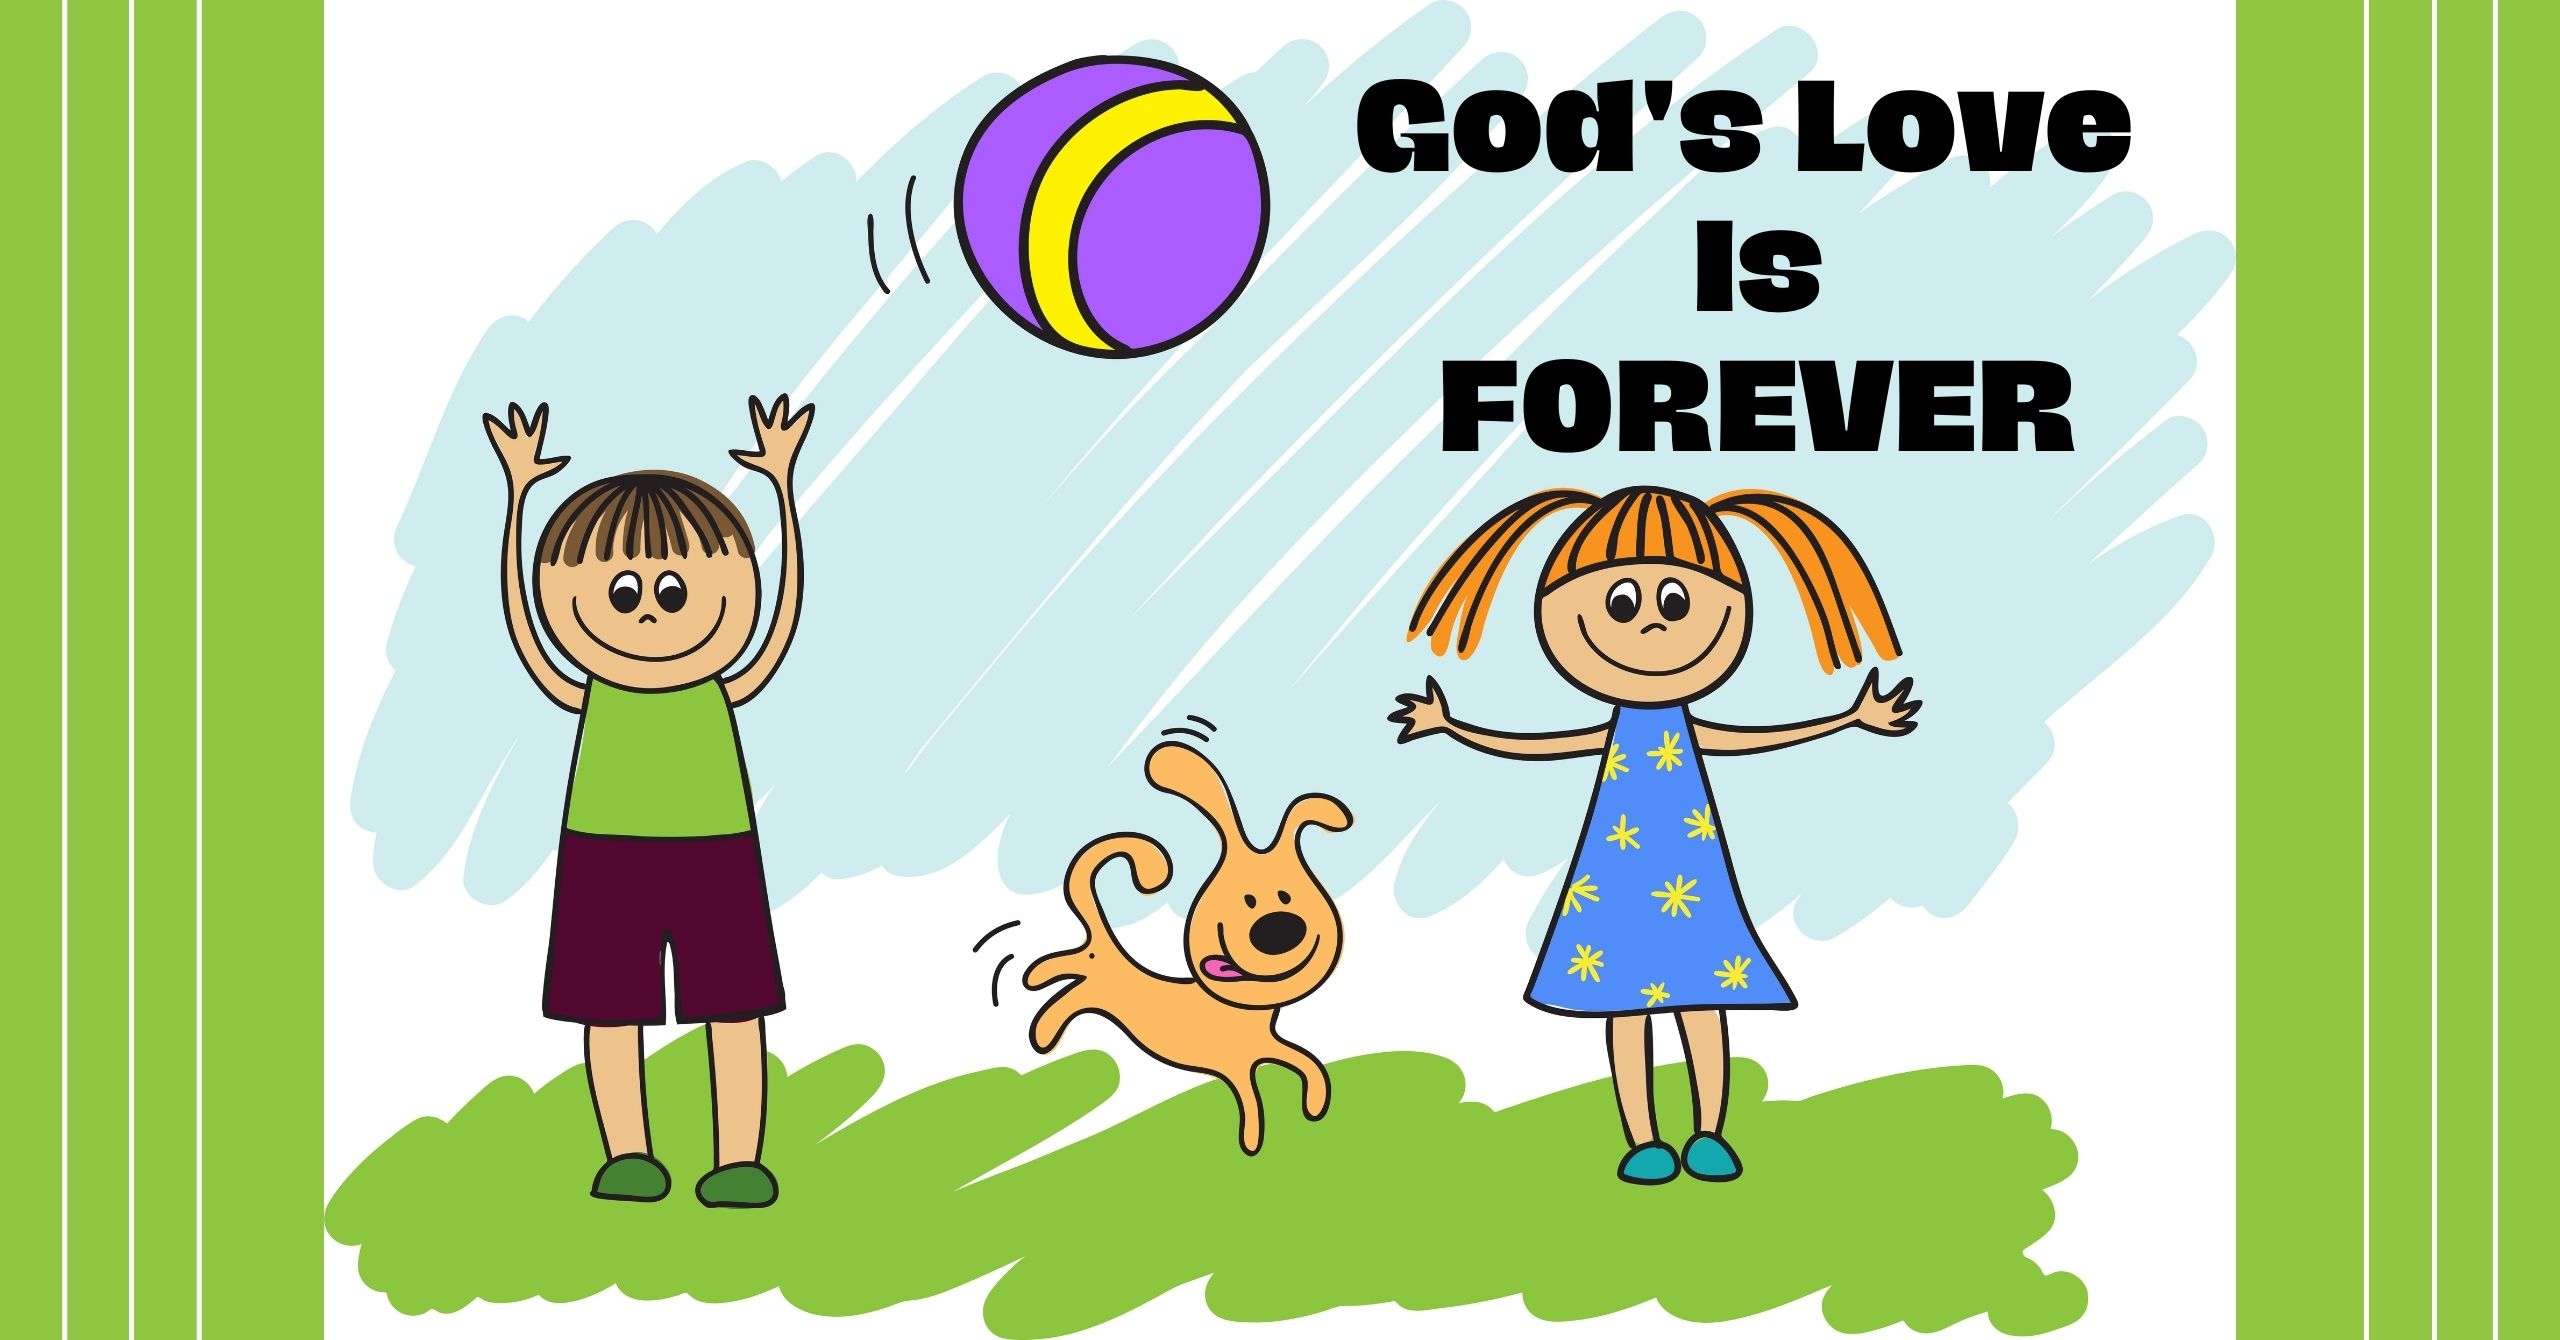 Featured image for “God’s Love Is Forever”